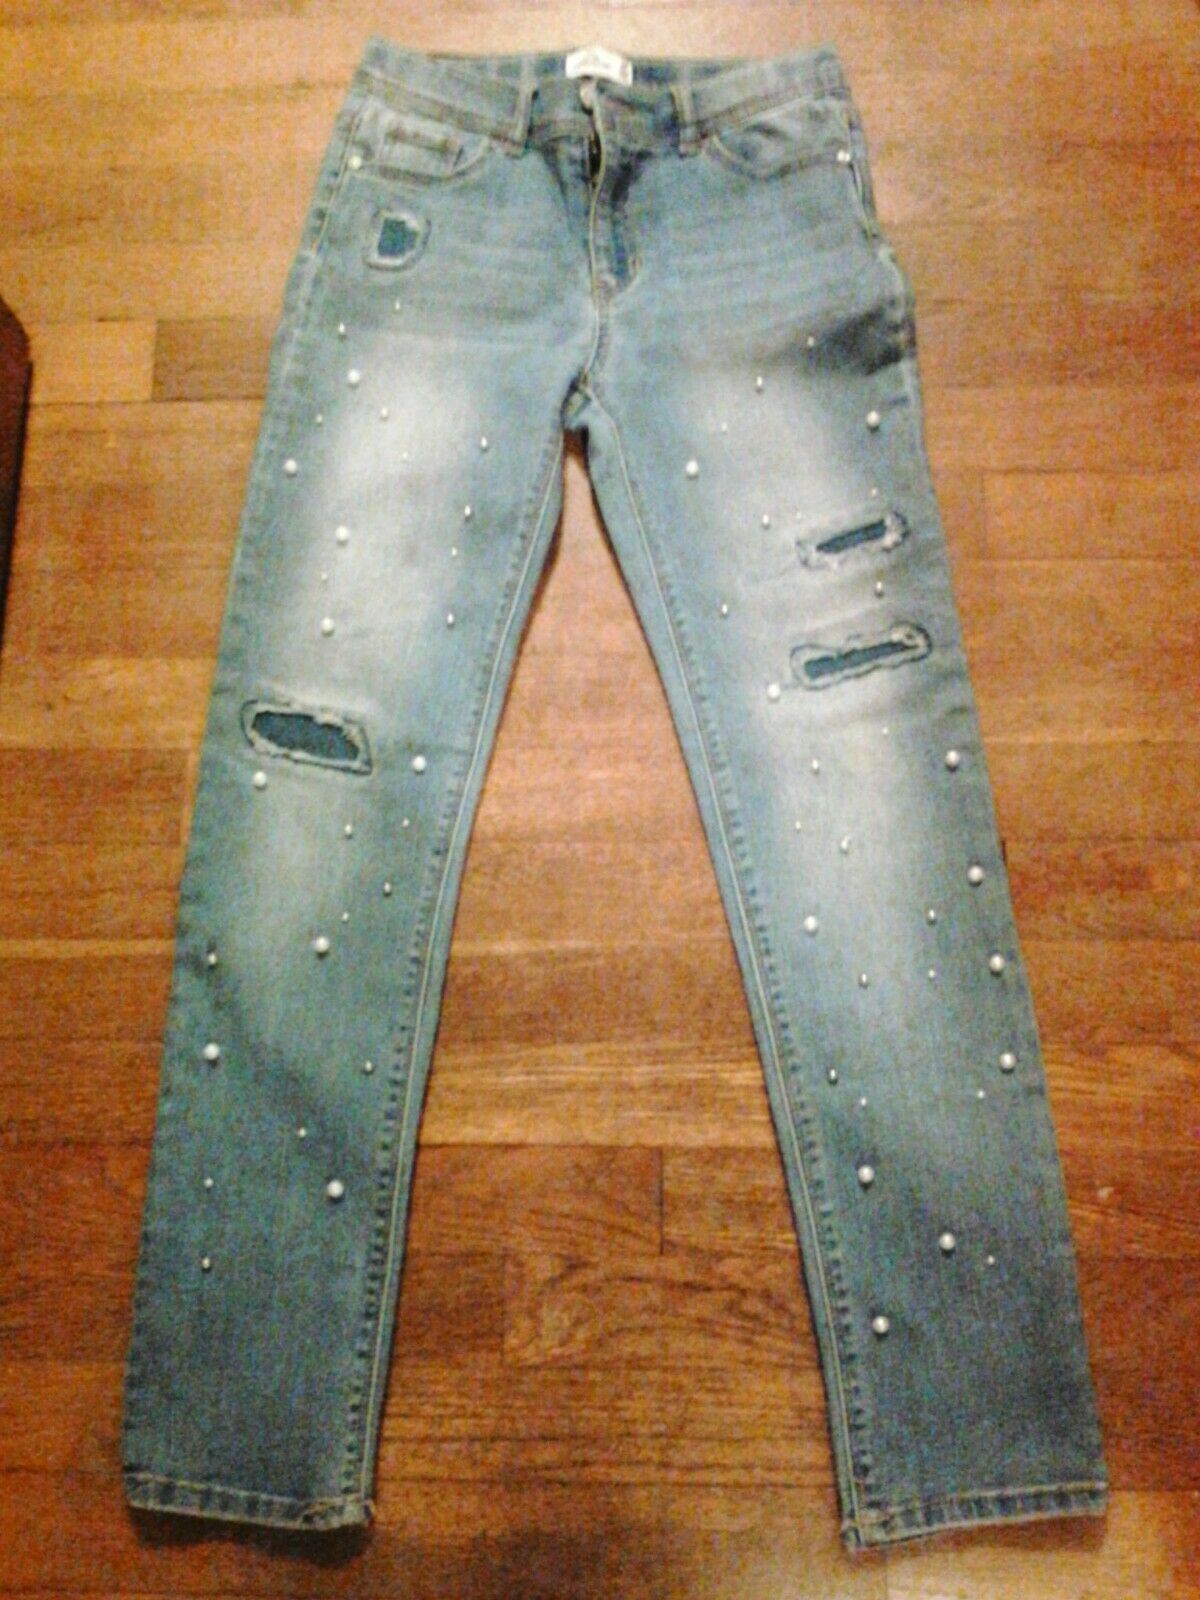 Pair Of Jordache Girl's Jeans, Size 14, Beaded Pearls On Legs